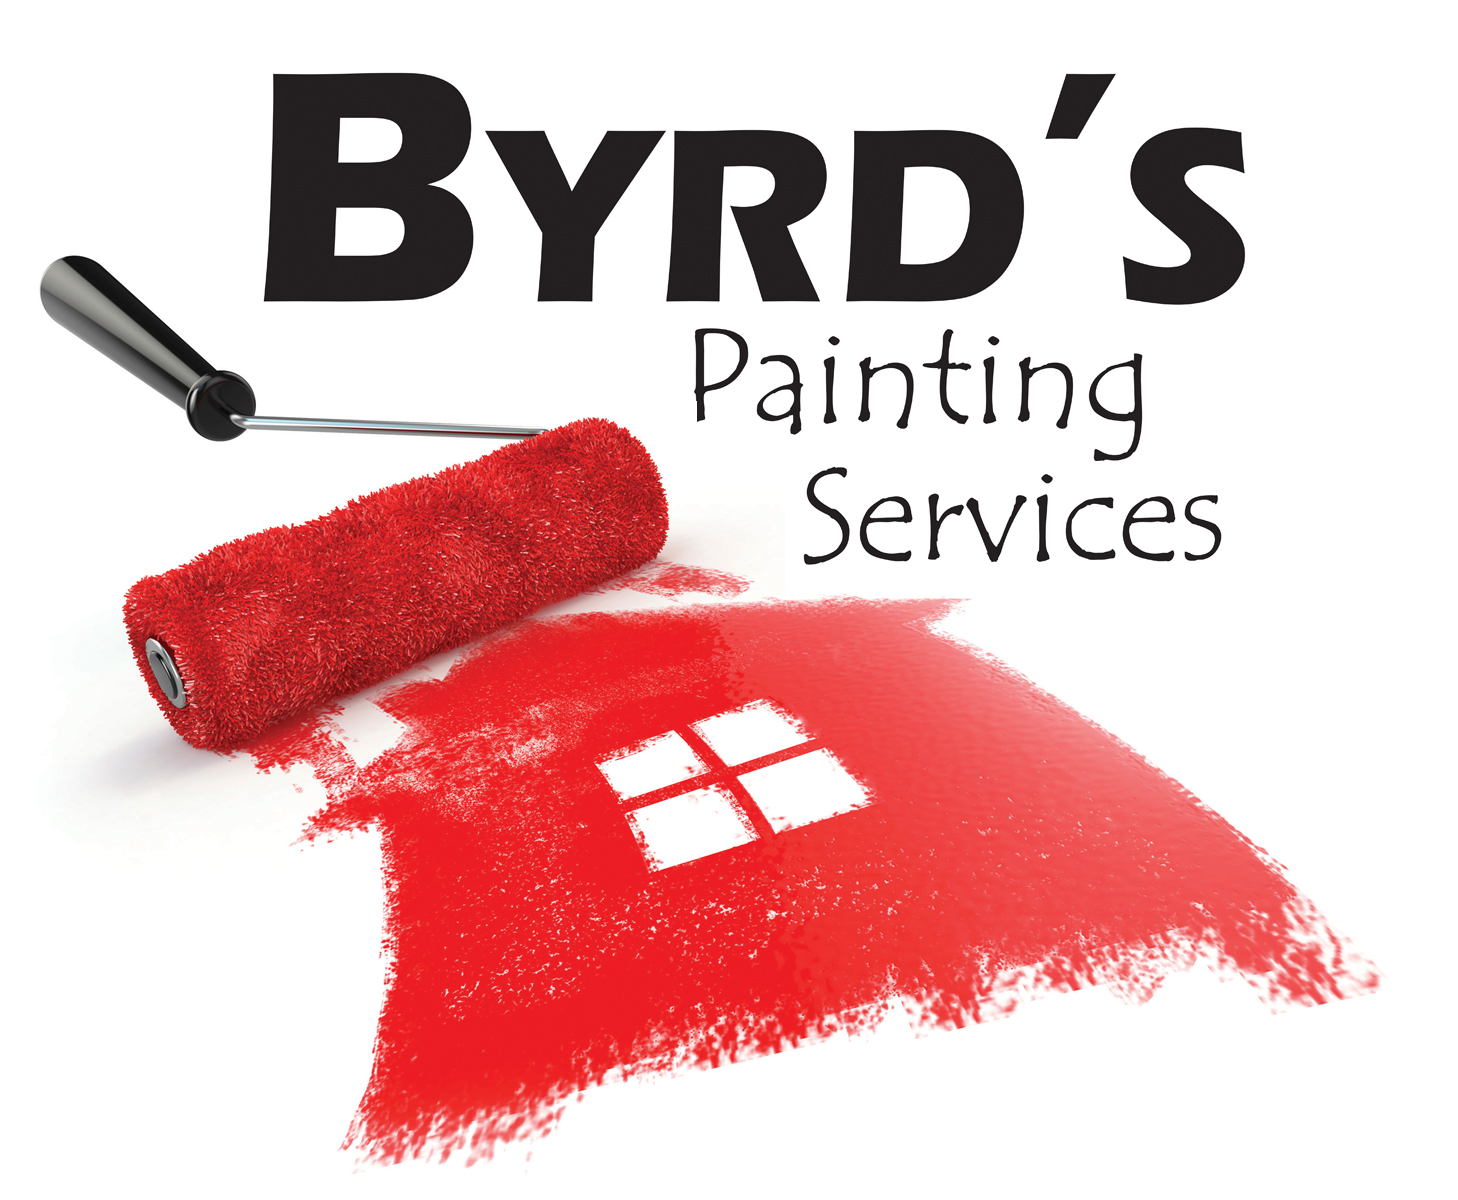 Byrd's Painting Services